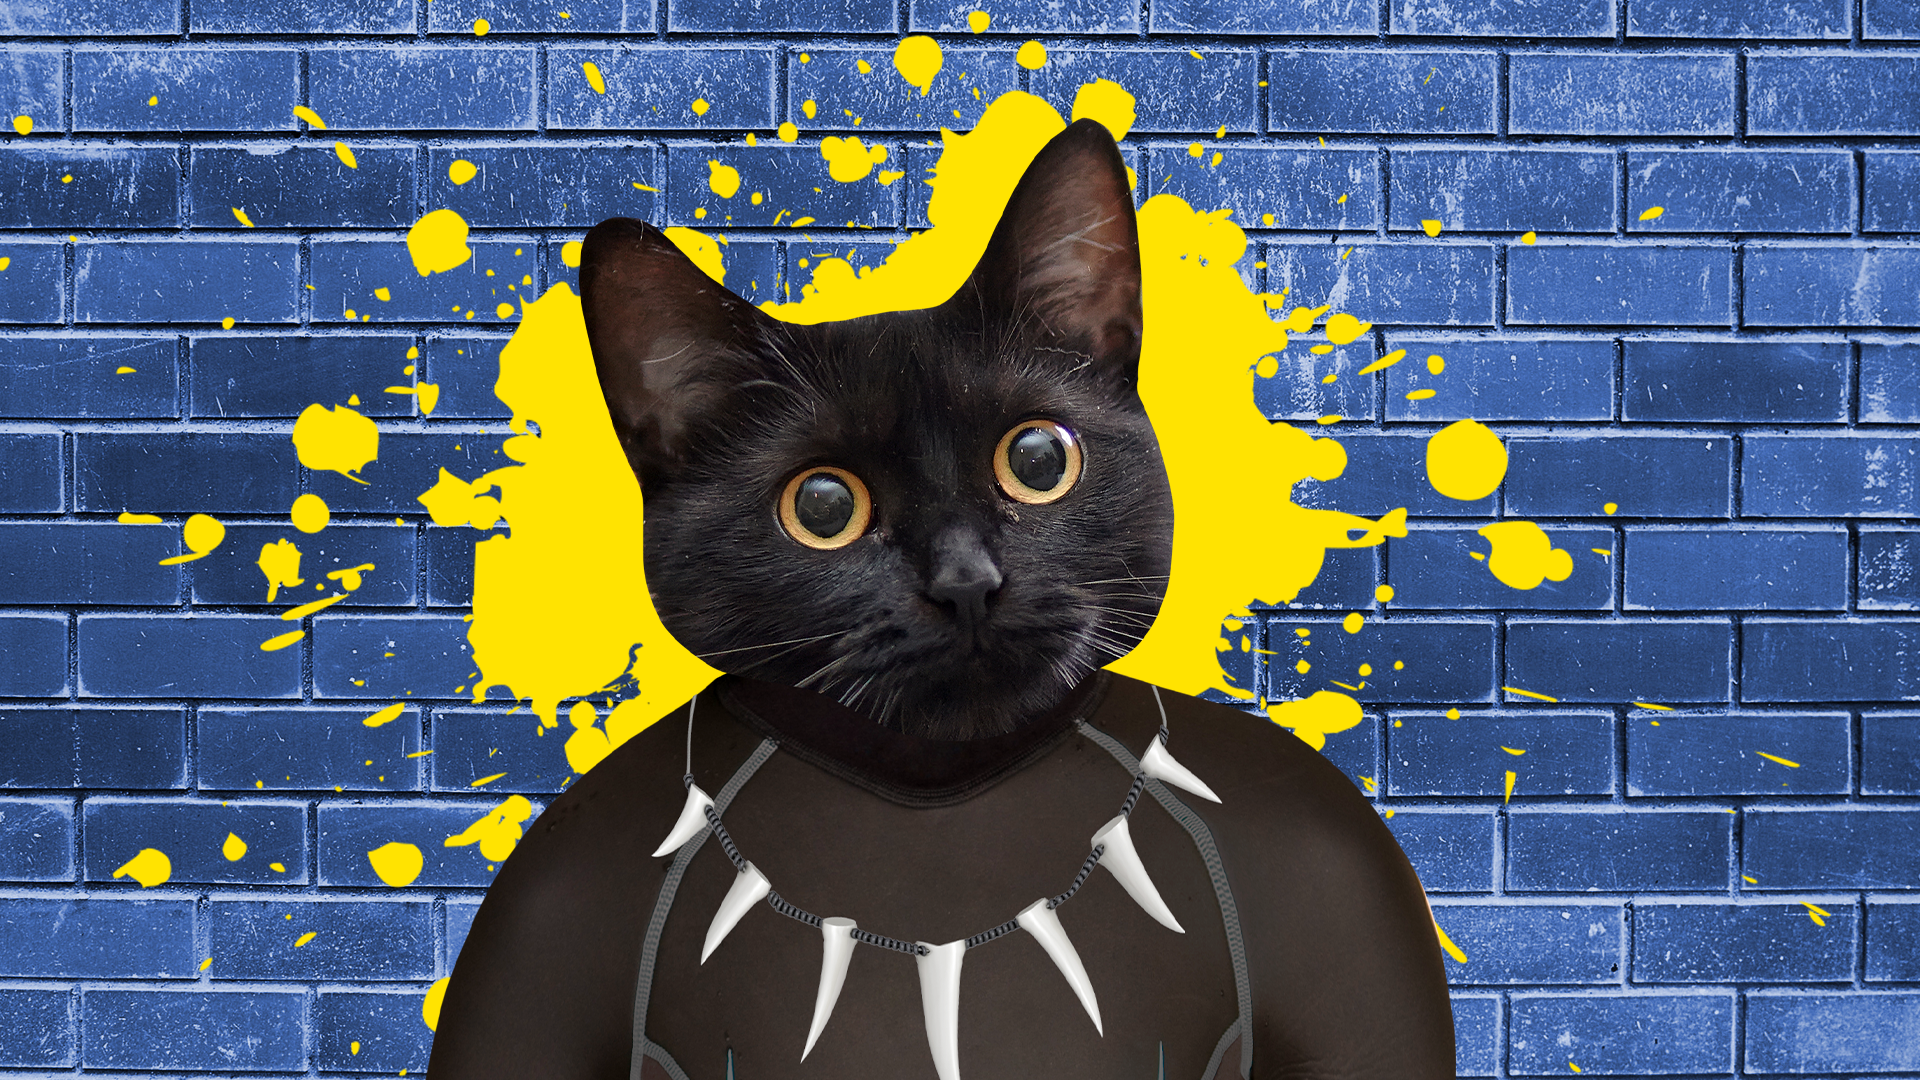 Beano Black Panther with splat on blue background